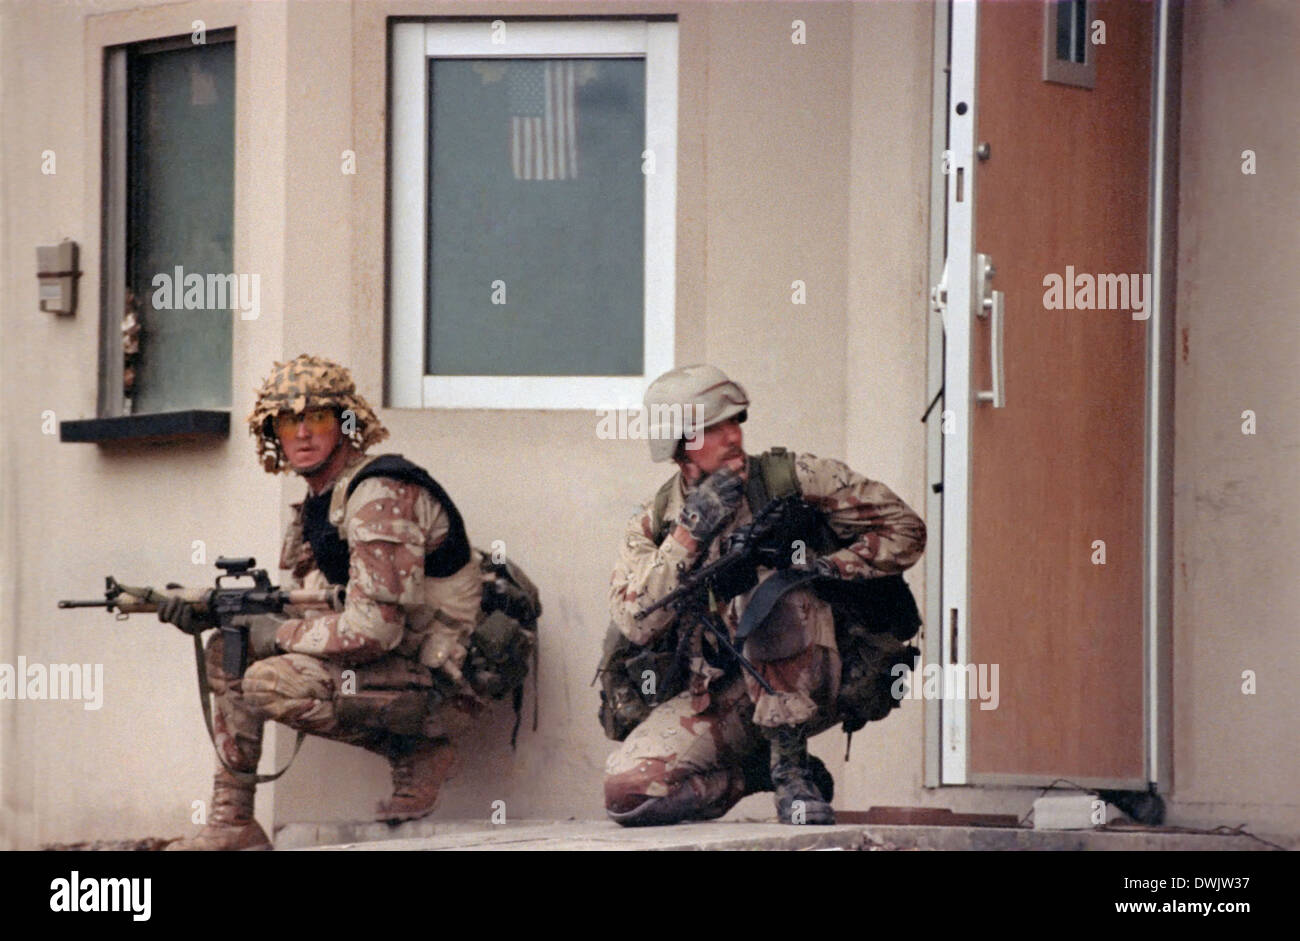 US Navy SEAL commandos arrive at the US Embassy in Kuwait City in a Desert Patrol Vehicle during the liberation of Kuwait City in the Gulf War February 26, 1991 in Southern Iraq. Stock Photo